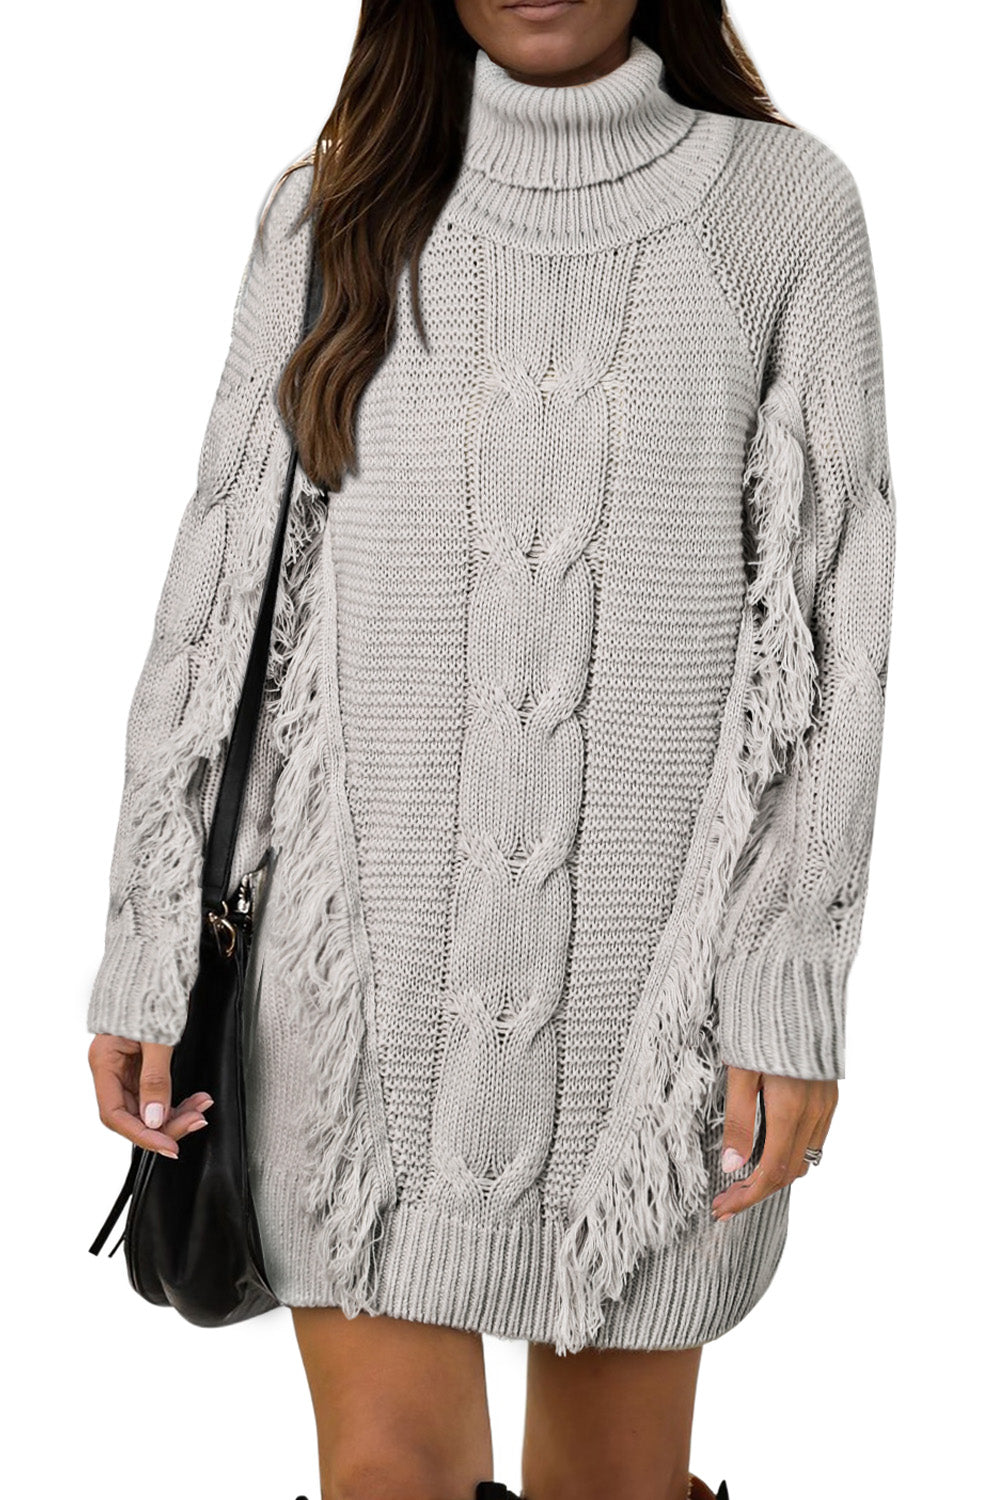 LC273304-11-S, LC273304-11-M, LC273304-11-L, LC273304-11-XL, LC273304-11-2XL, Gray Womens Twist Fringe Cable Knit High Neck Oversized Sweater Dress